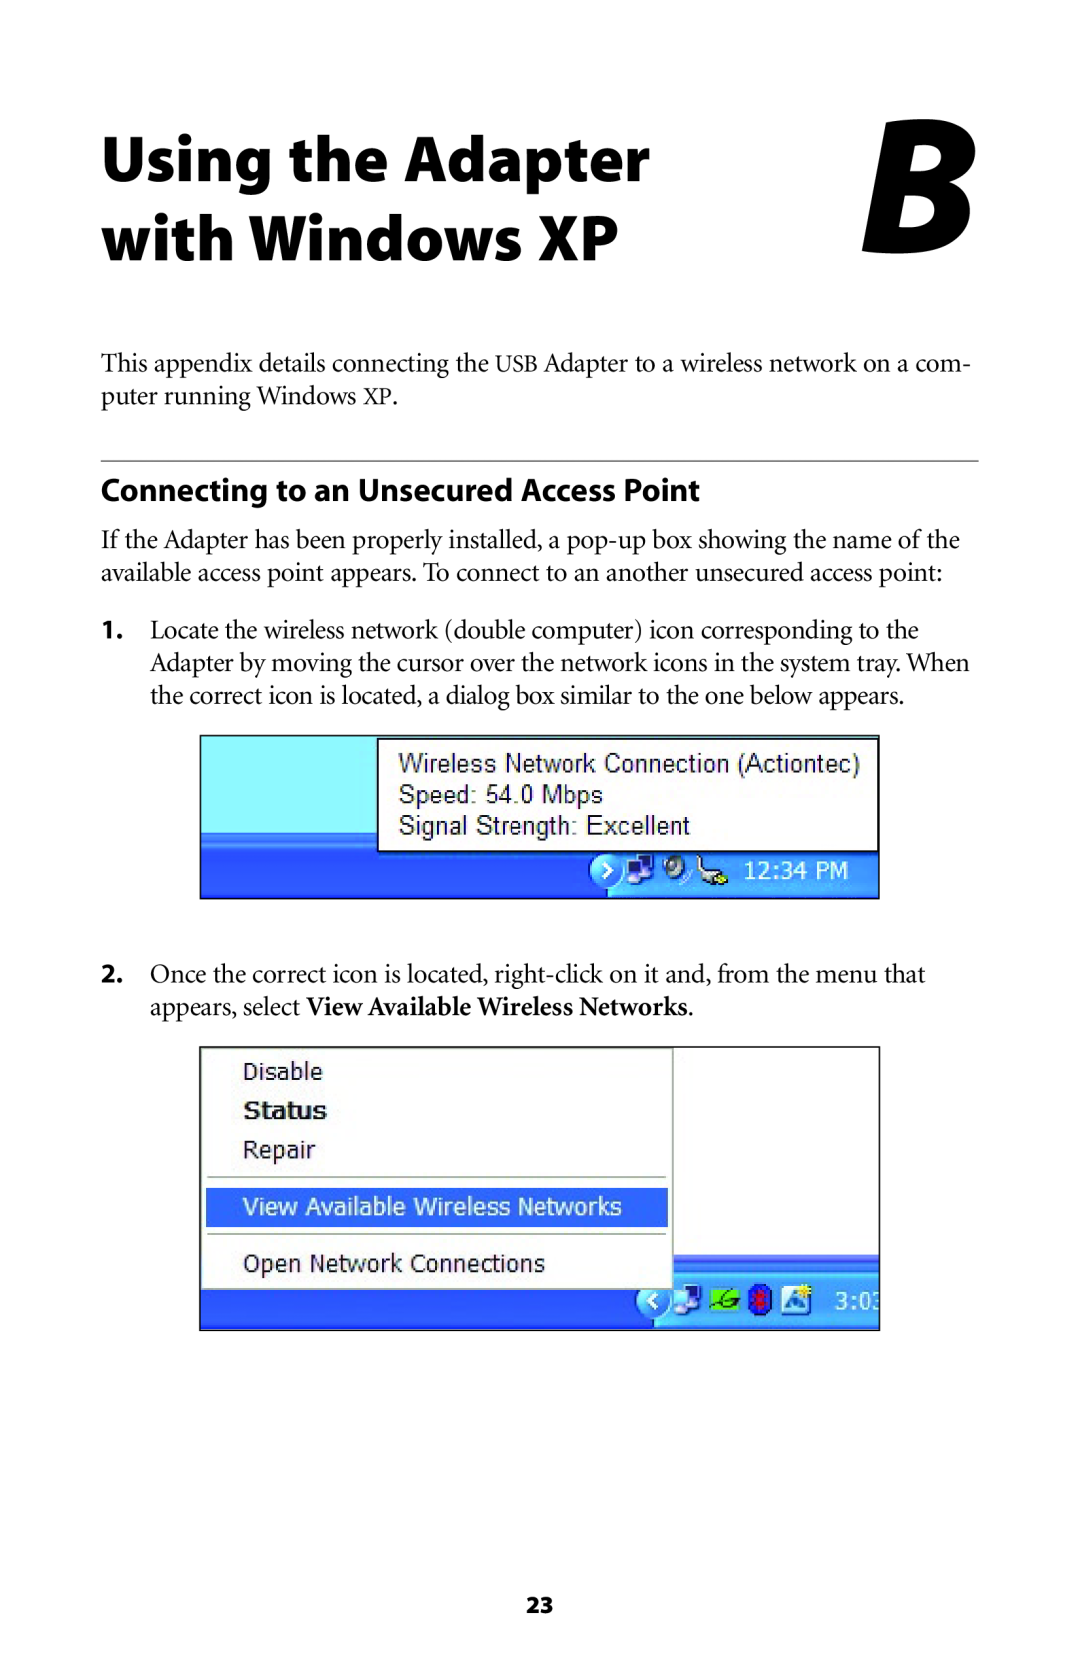 Actiontec electronic 802UIG user manual Using the Adapter, with Windows XP, Connecting to an Unsecured Access Point 